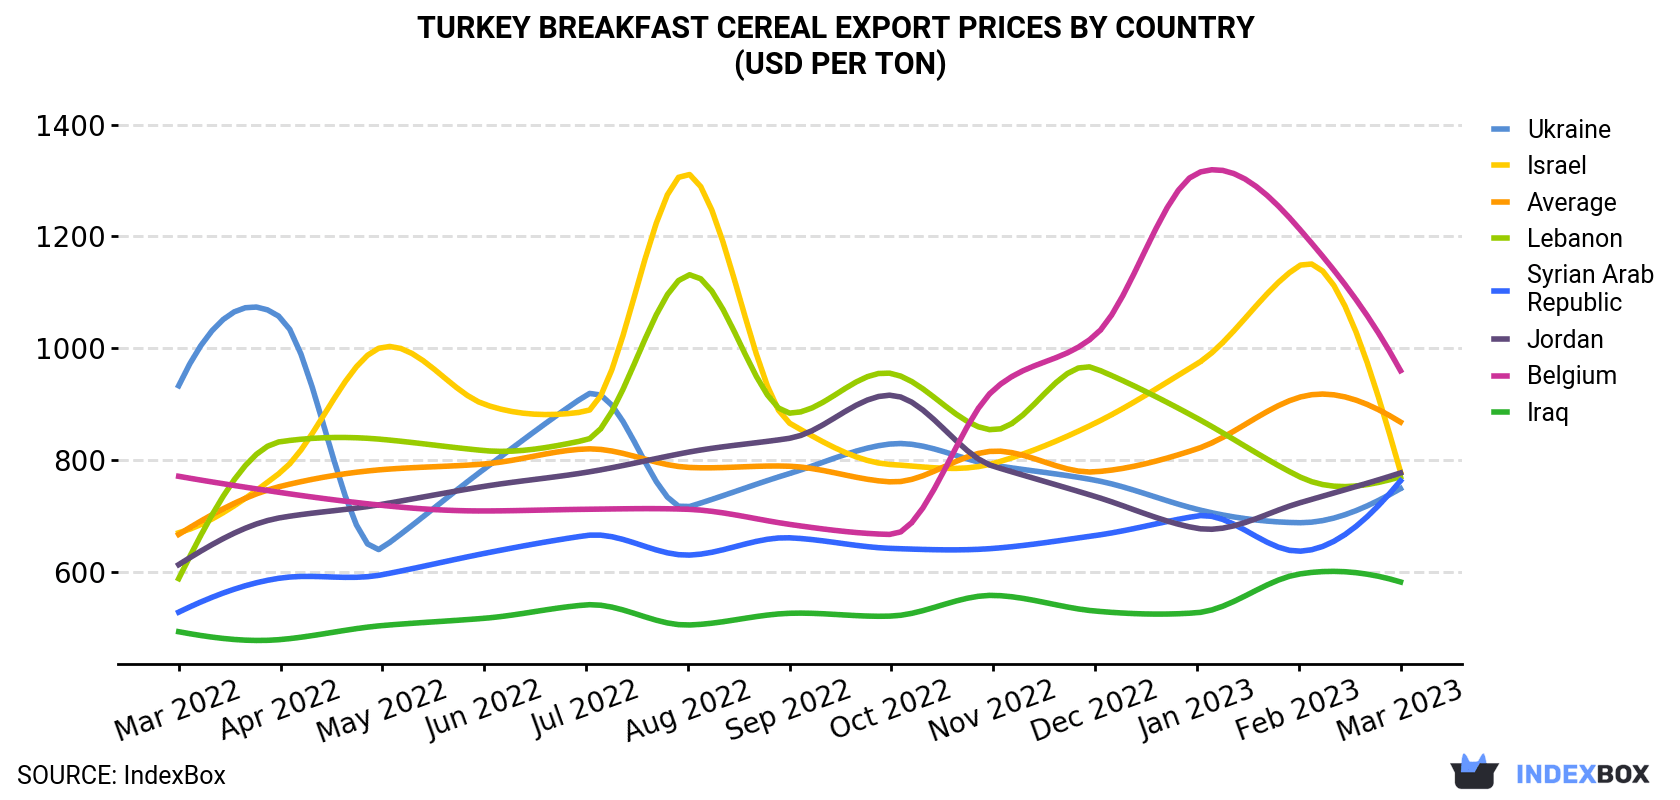 Turkey Breakfast Cereal Export Prices By Country (USD Per Ton)